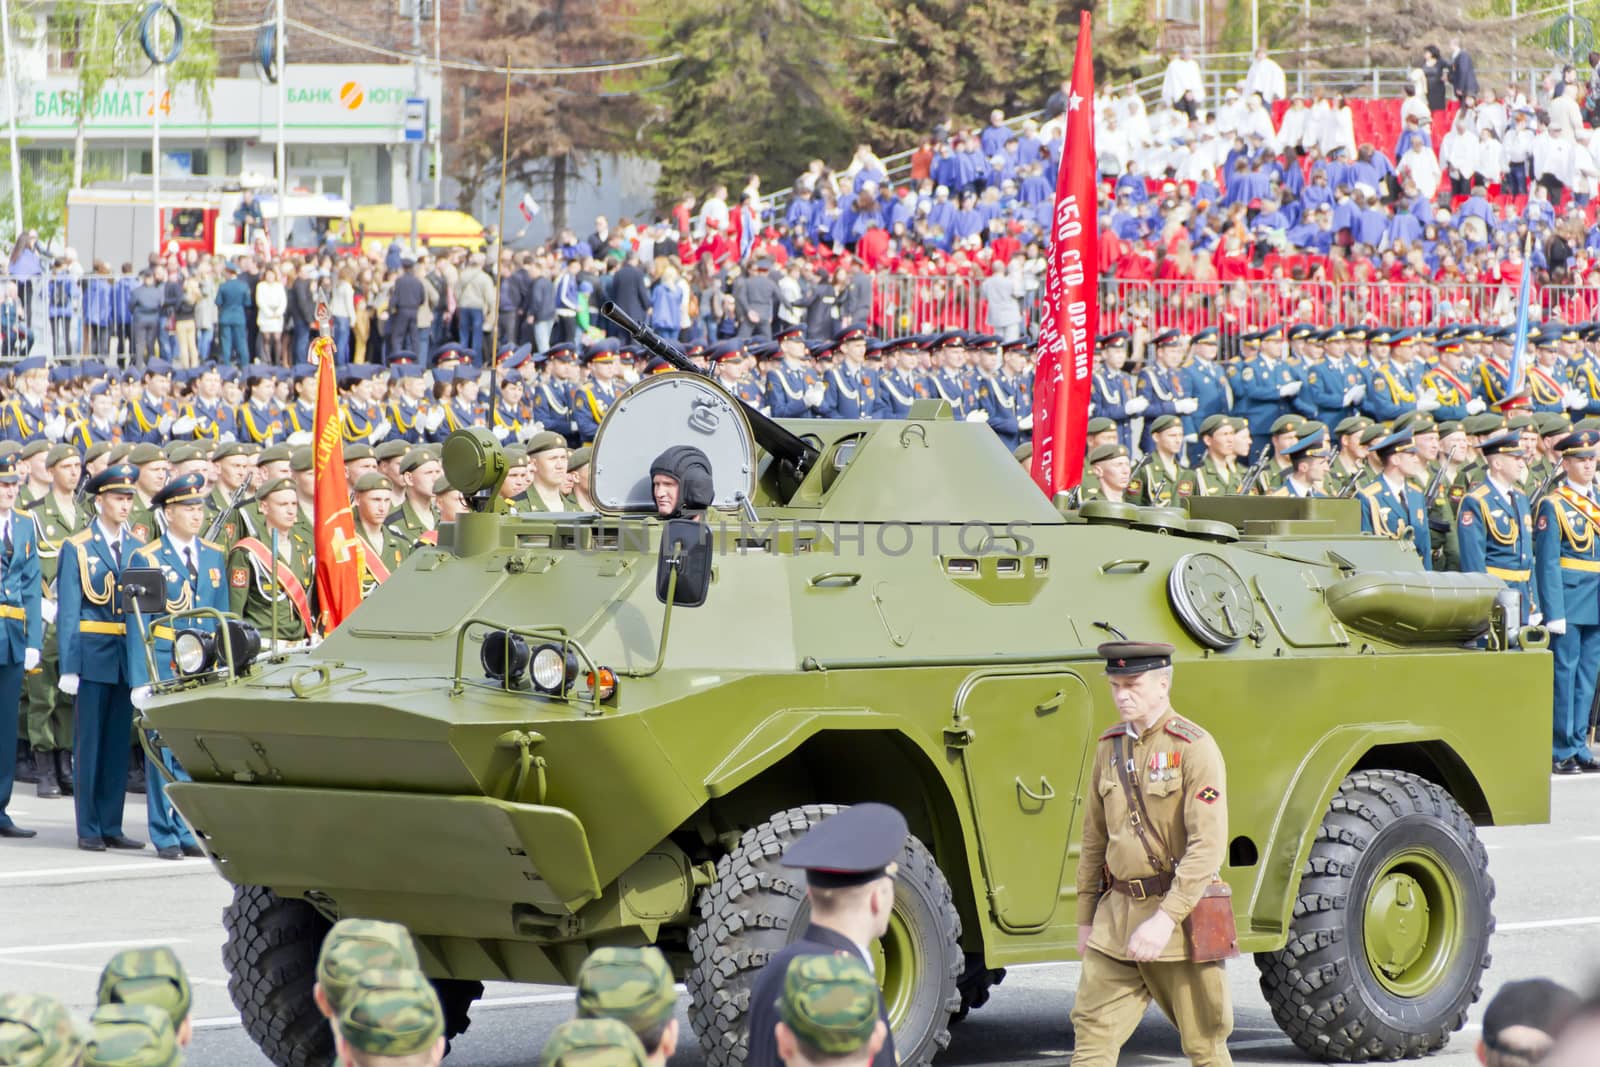 Russian military transport at the parade on annual Victory Day by Julialine